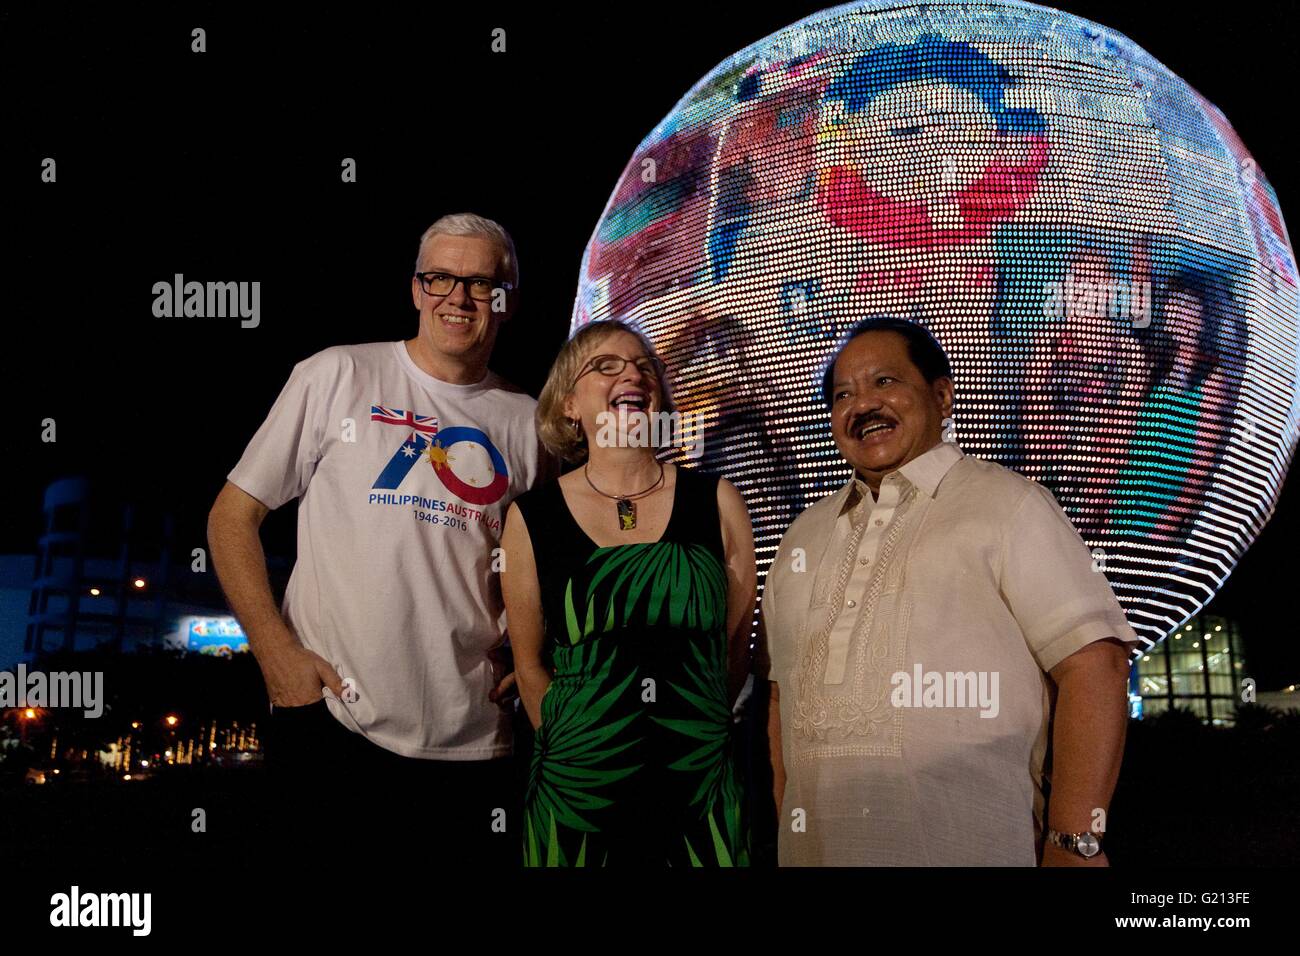 Pasay, Philippines. 21st May, 2016. Ambassador Amanda Gorely (C) laughs while chatting with Australian Embassy Counsellor Richard Rodgers (L), and NHC Executive Director Vic Badoy (R) as they pose in front of the electronic globe billlboard showing the 70th anniversary logo in Pasay CIty. Australian Ambassador to the Philippines Amanda Gorely led the commemorative light up of the SM Mall of Asia Globe with the 70th Anniversary Philippine-Australia logo. Credit:  J Gerard Seguia/Pacific Press/Alamy Live News Stock Photo